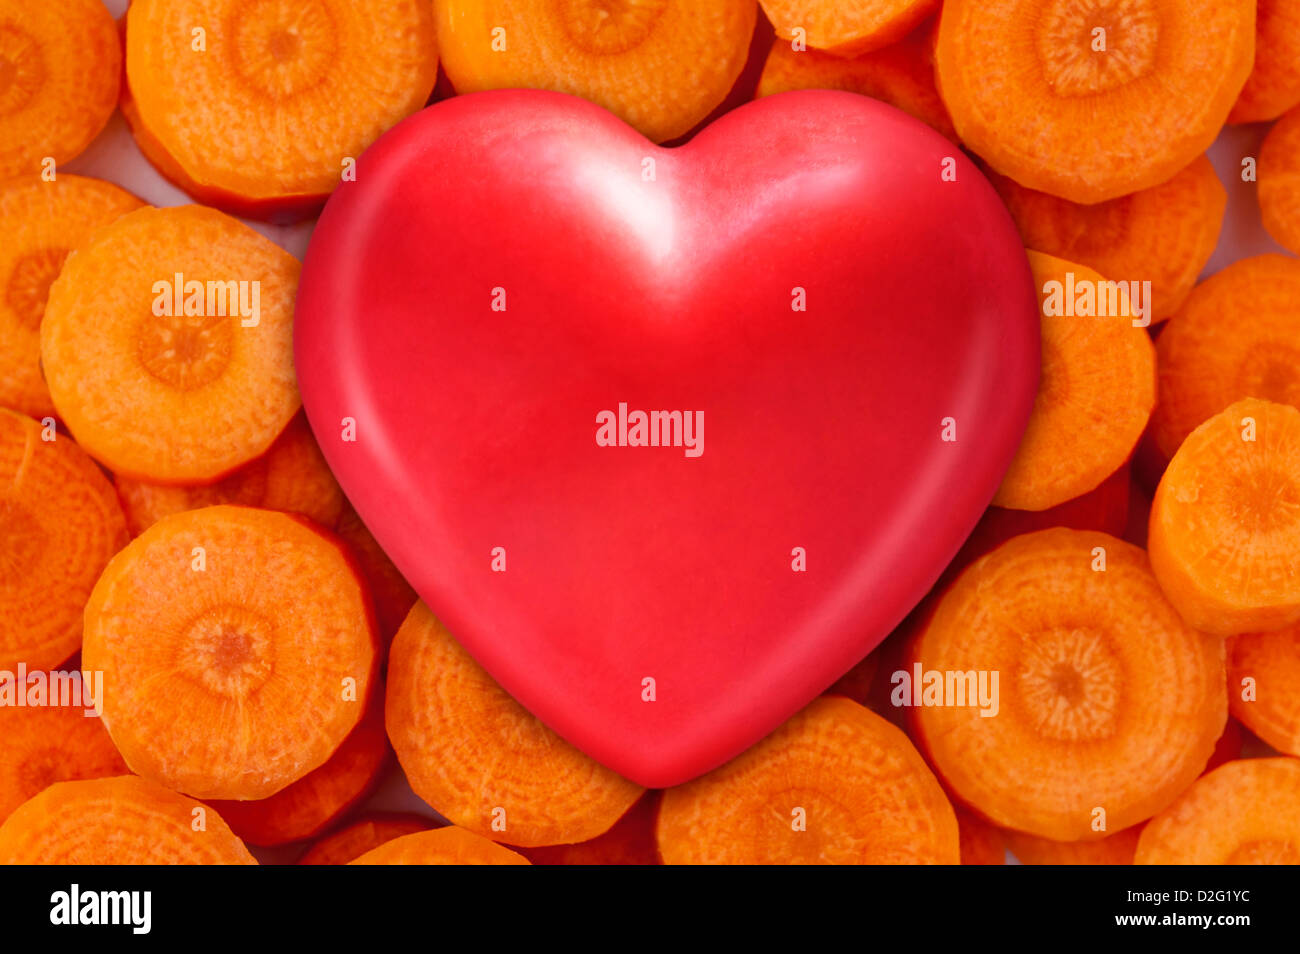 Healthy food - red heart on fresh carrots for healthy eating Stock Photo